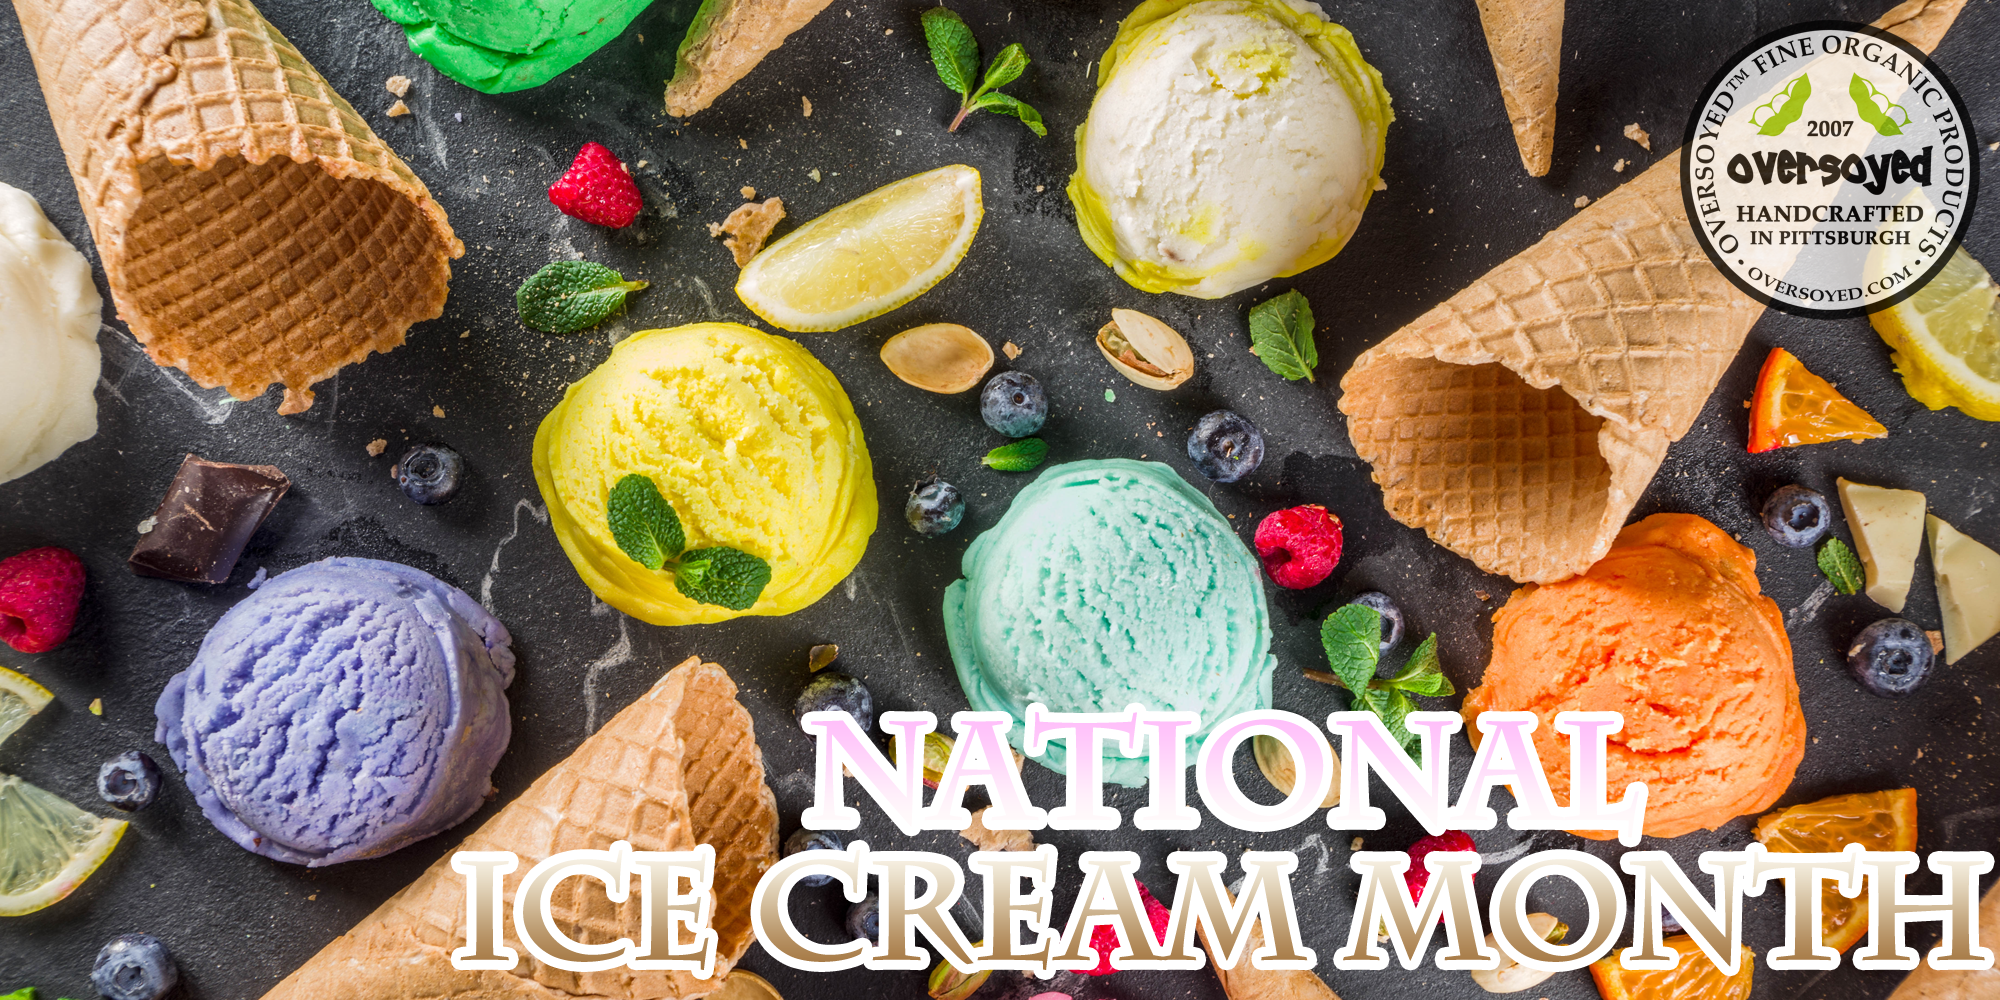 OverSoyed Fine Organic Products - National Ice Cream Month